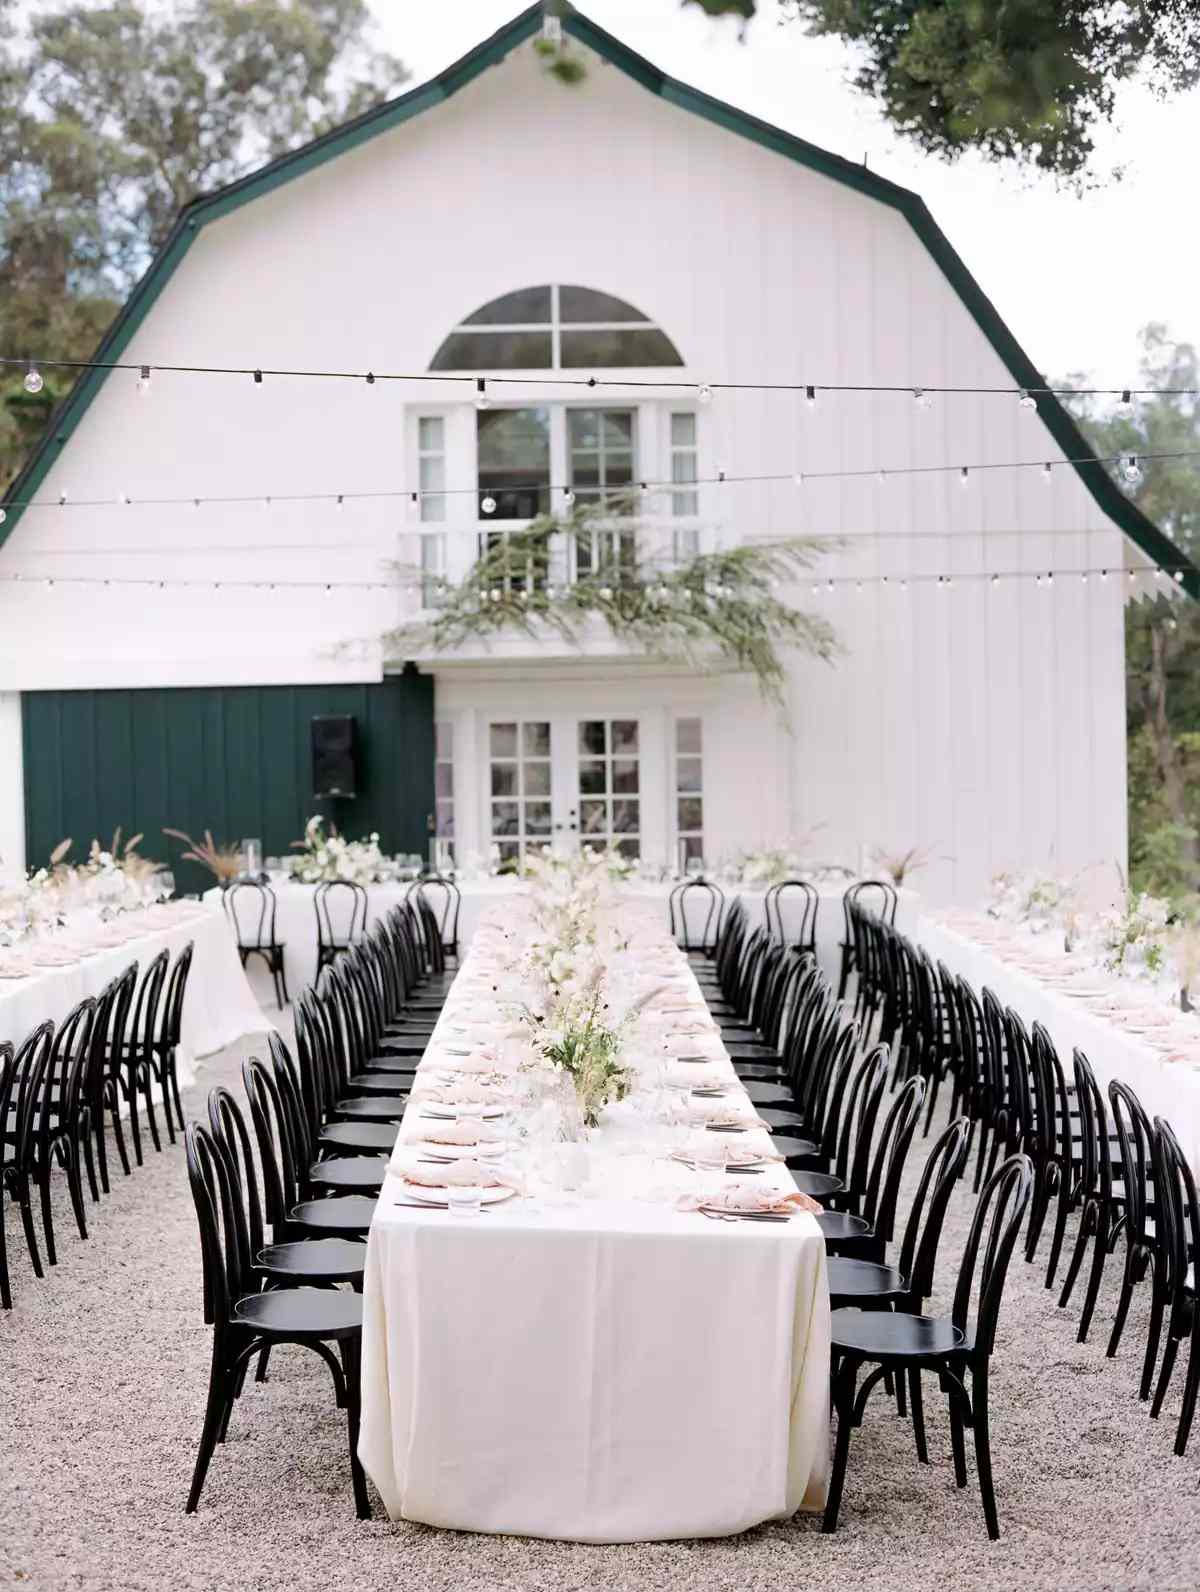 Long Wedding Reception Tables at Rustic Outdoor Venue with Black Chairs, Neutral Linens, and Floral Arrangements